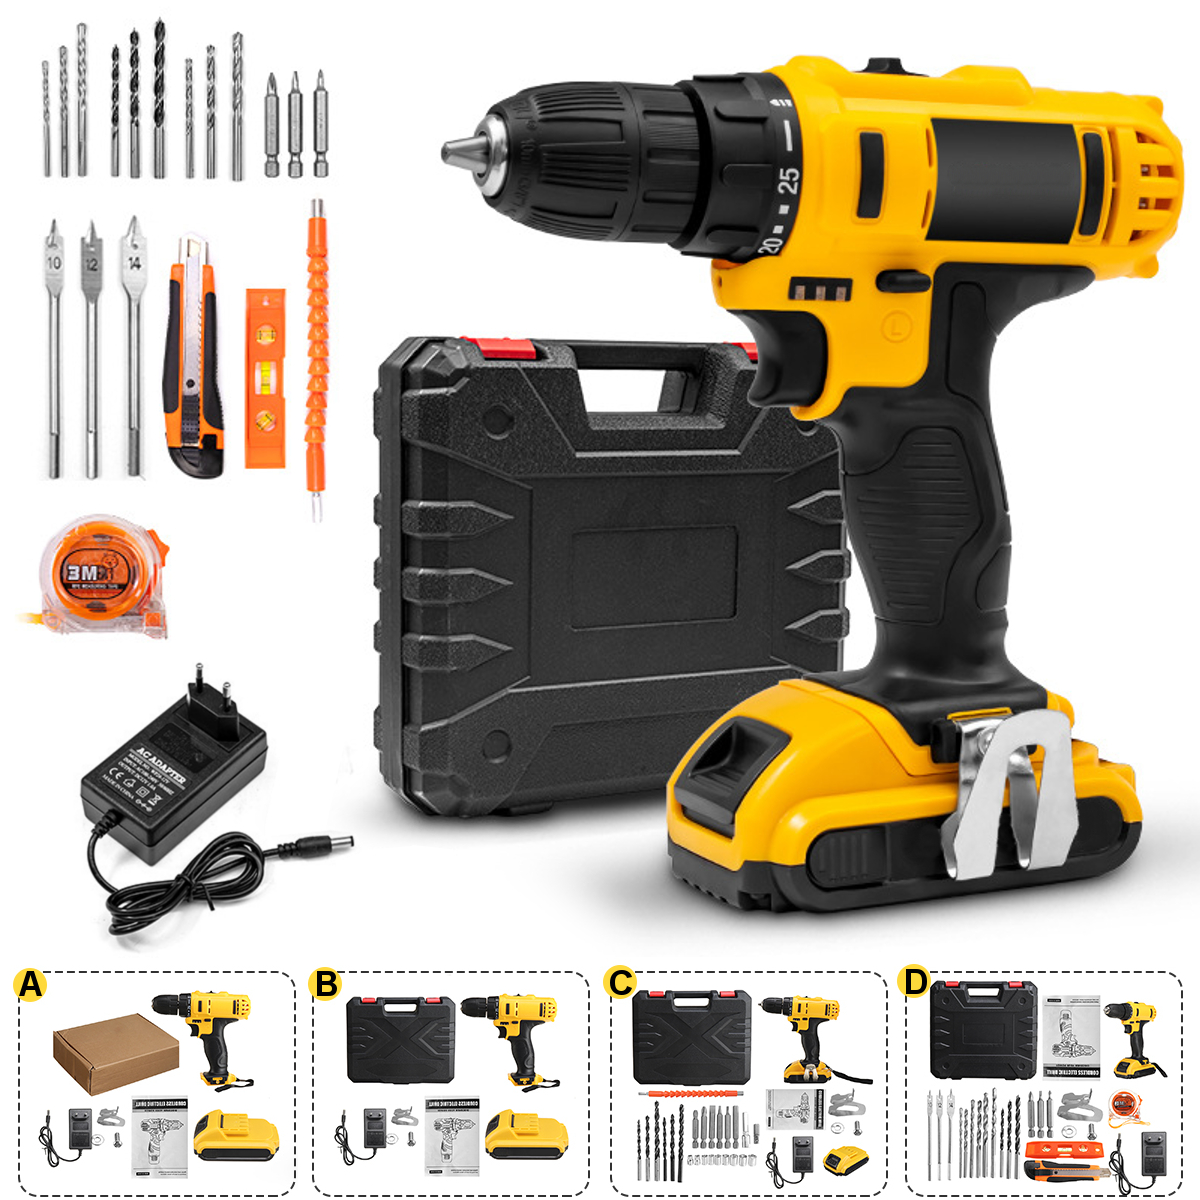 21V-520Nm-Electric-Drill-Cordless-Rechargeable-Screwdriver-Hammer-Drill-Set-w-Battery-1855055-4